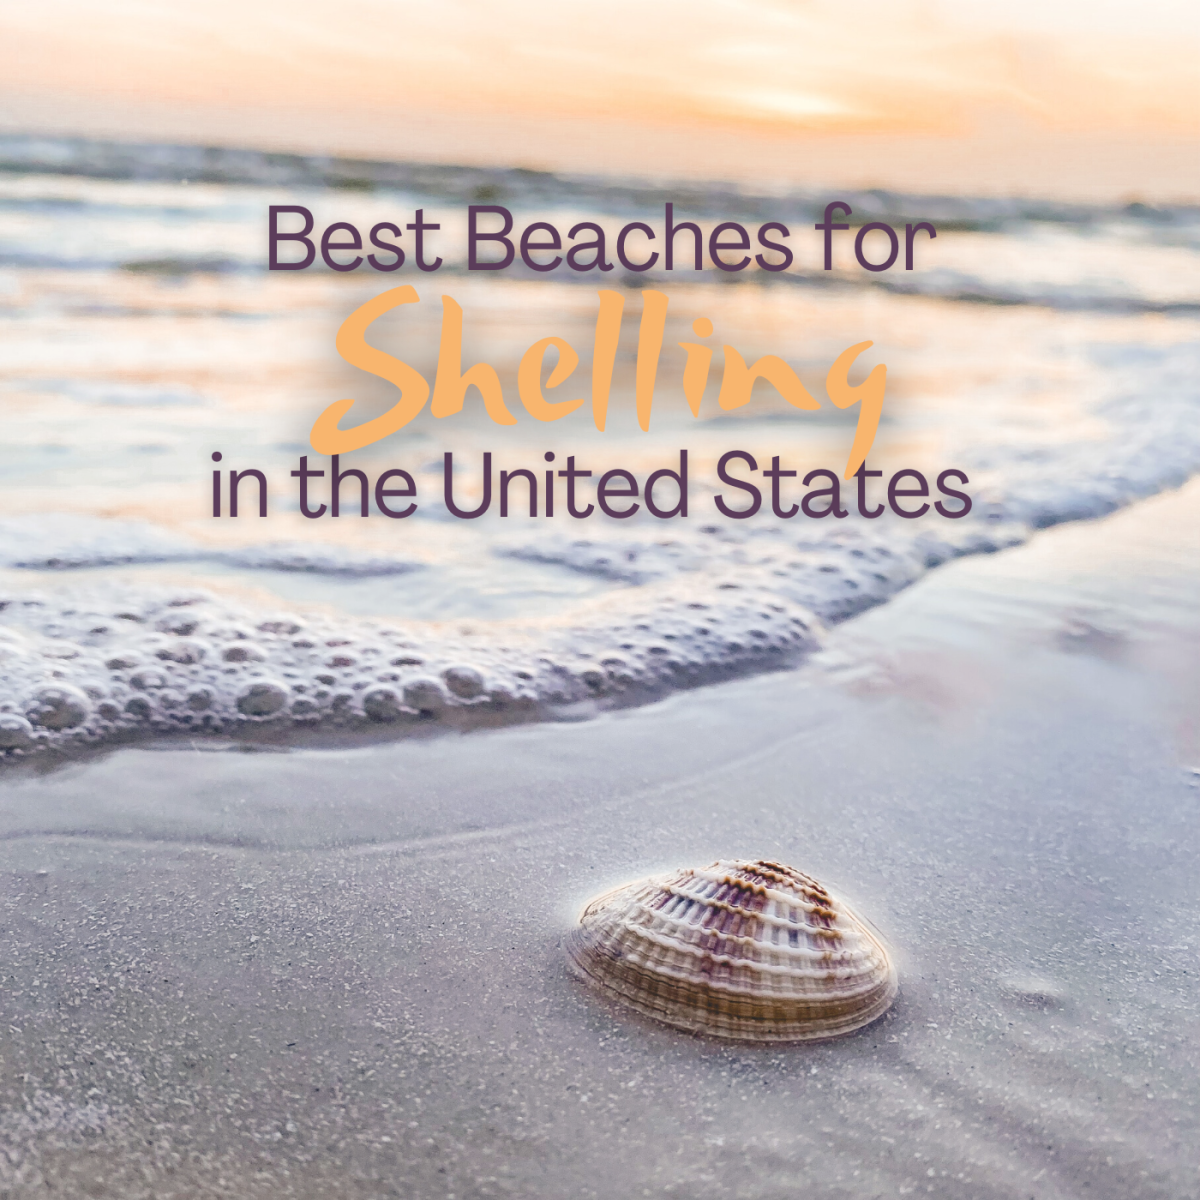 Best Beaches for Shelling in the U.S., From California to Florida